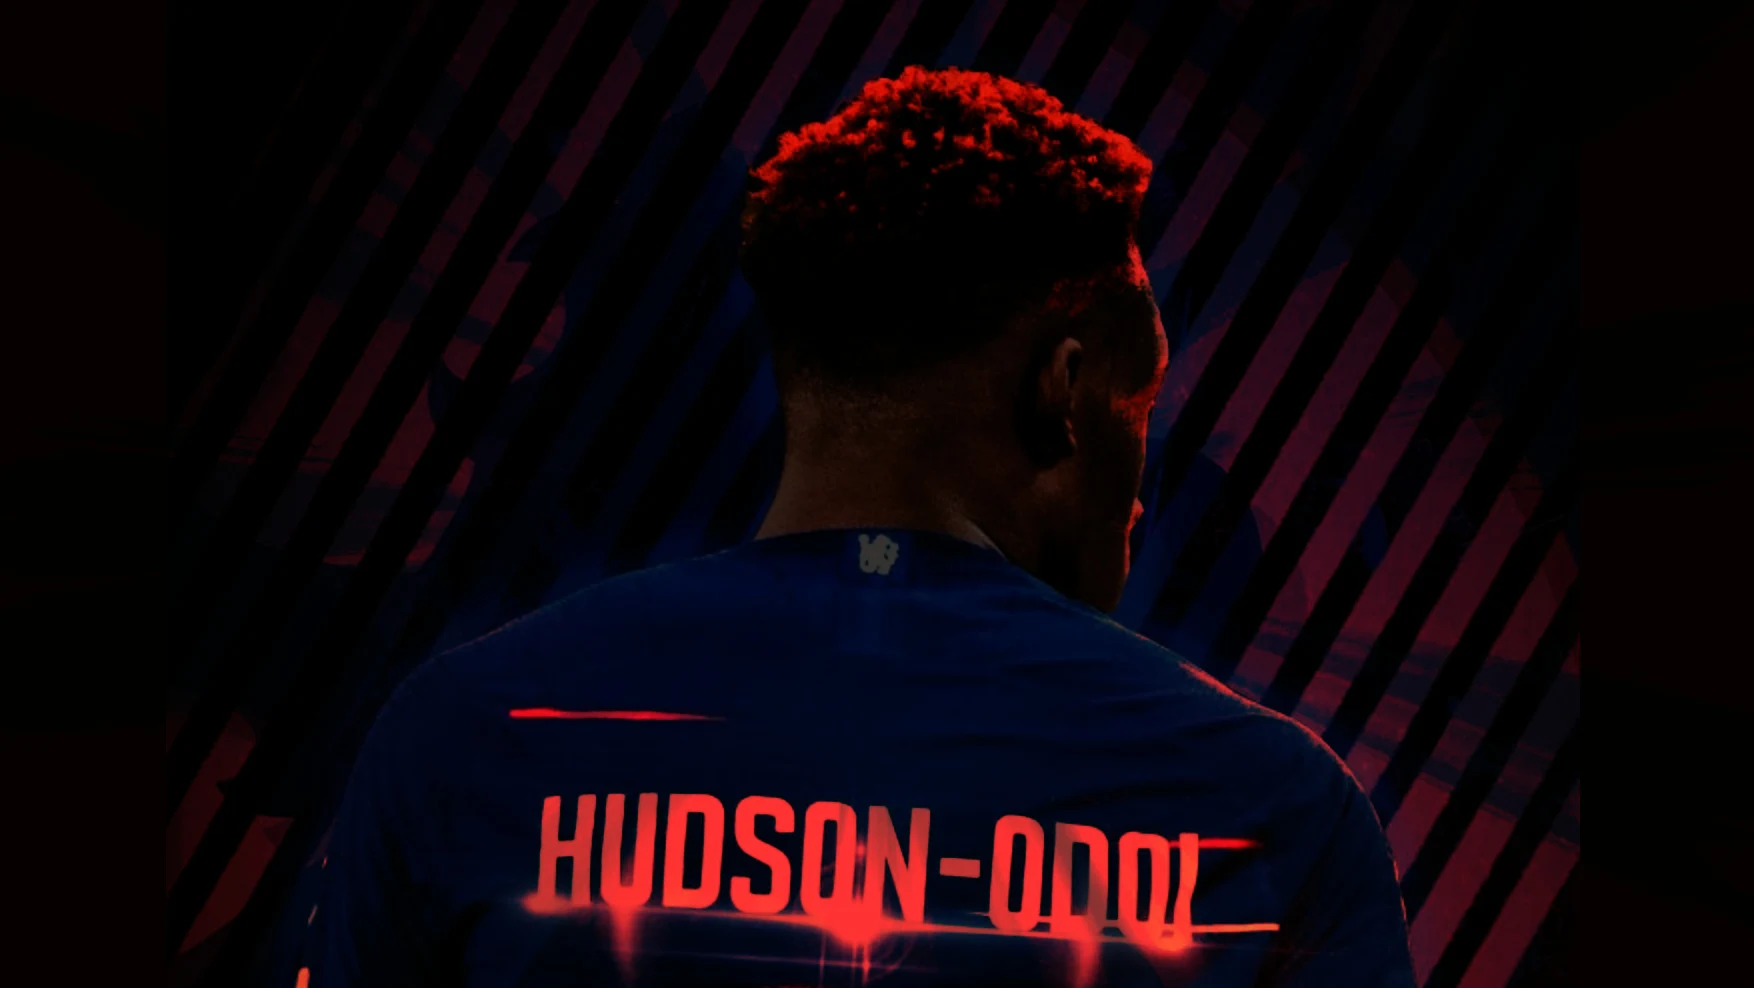 Callum Hudson-Odoi channels inner Neymar with a filthy chapeu during 2-0 West Ham win